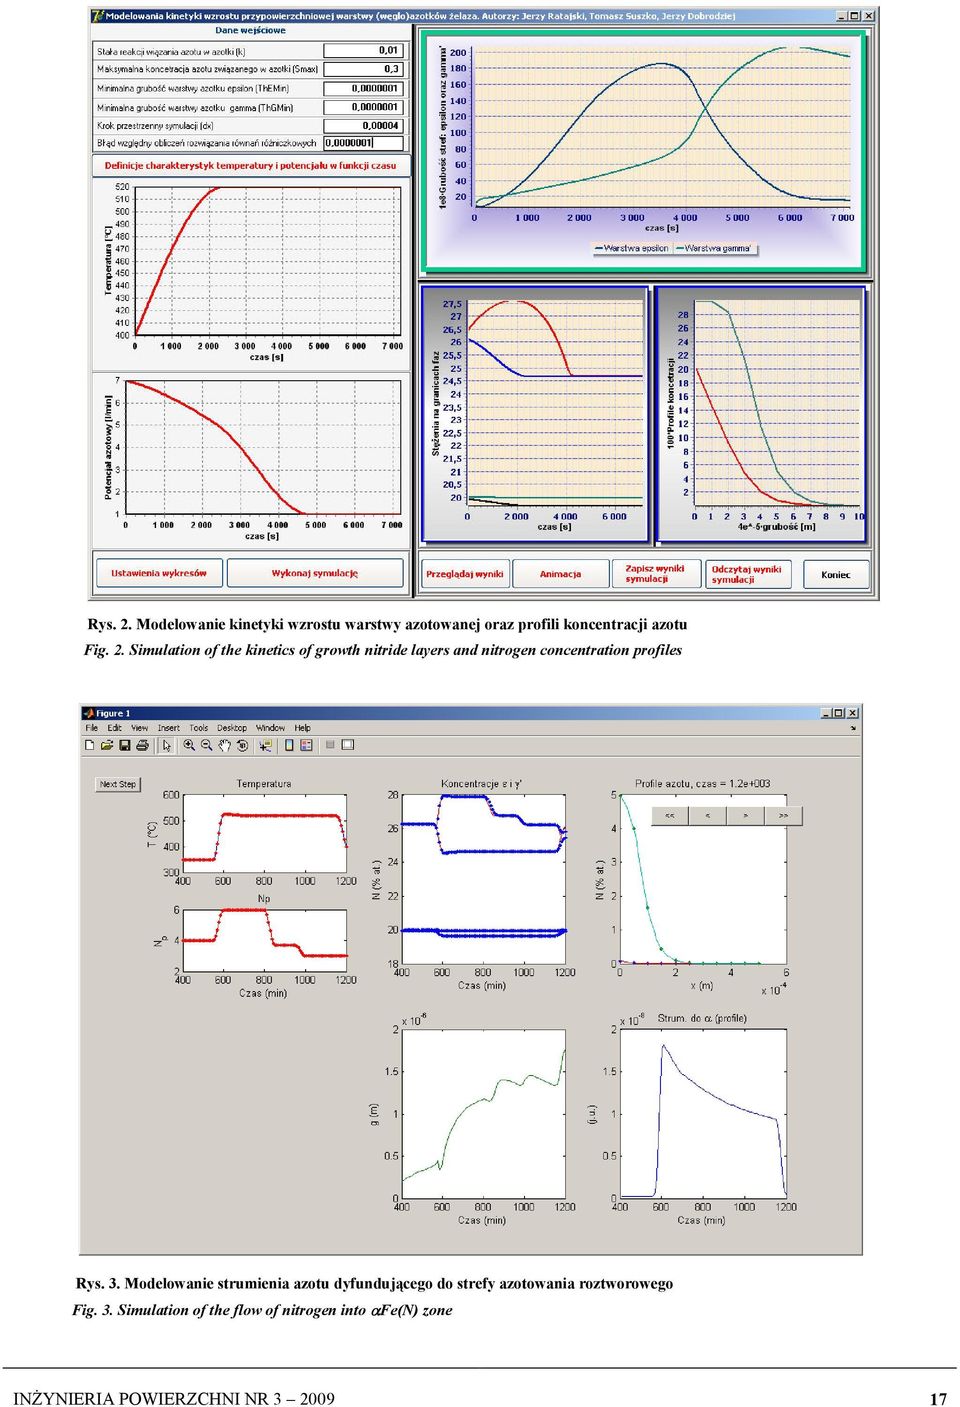 Simulation of the kinetics of growth nitride layers and nitrogen concentration profiles